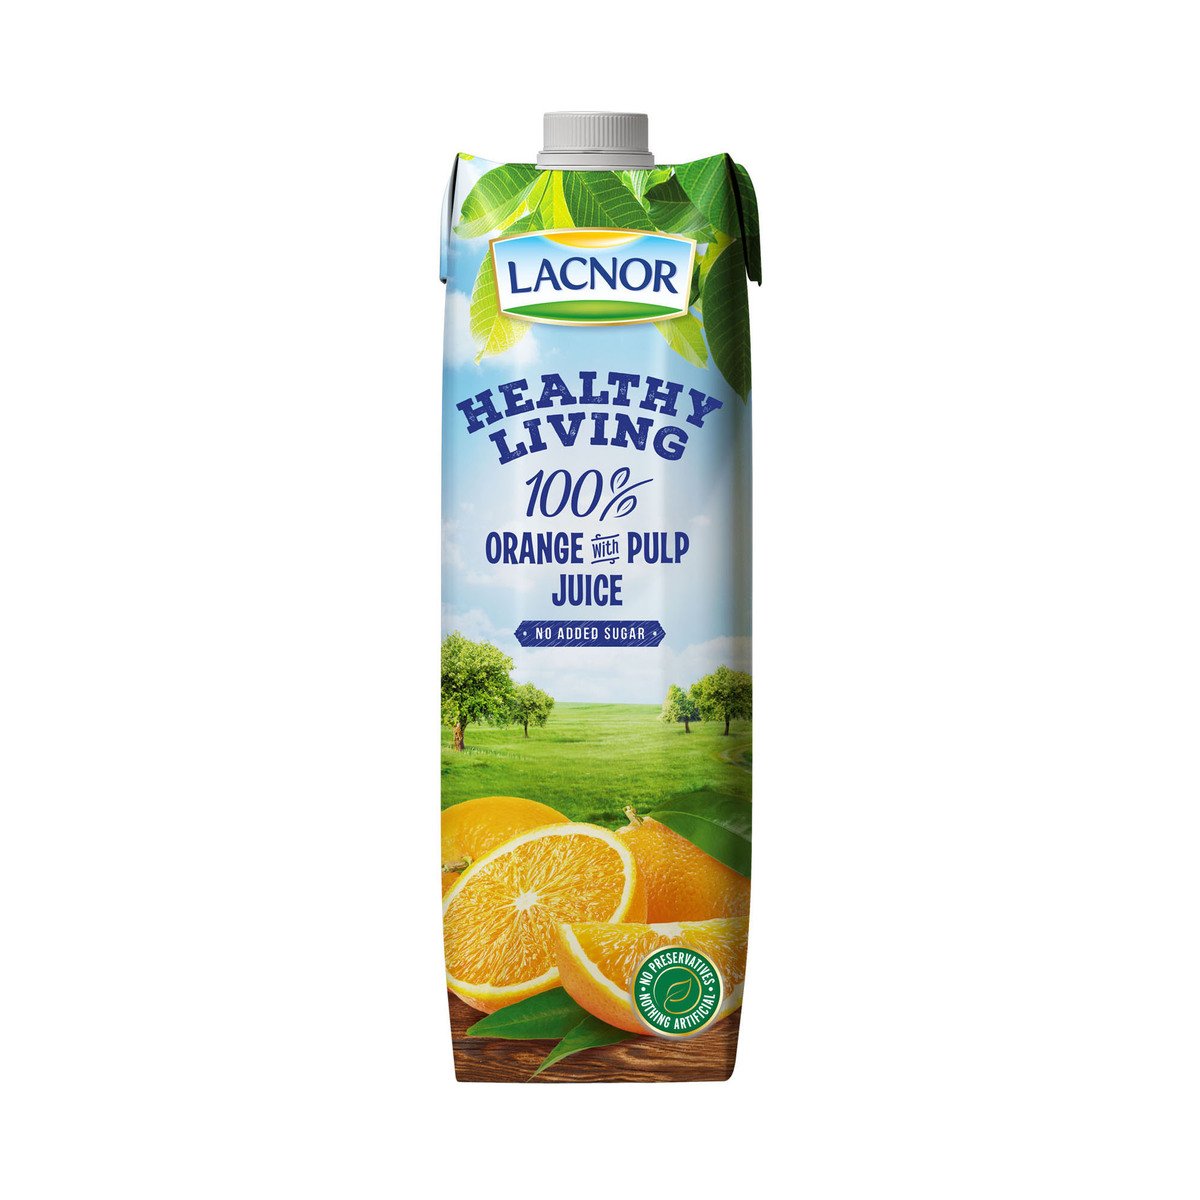 Lacnor Healthy Living Orange Juice with Pulp 1 Litre